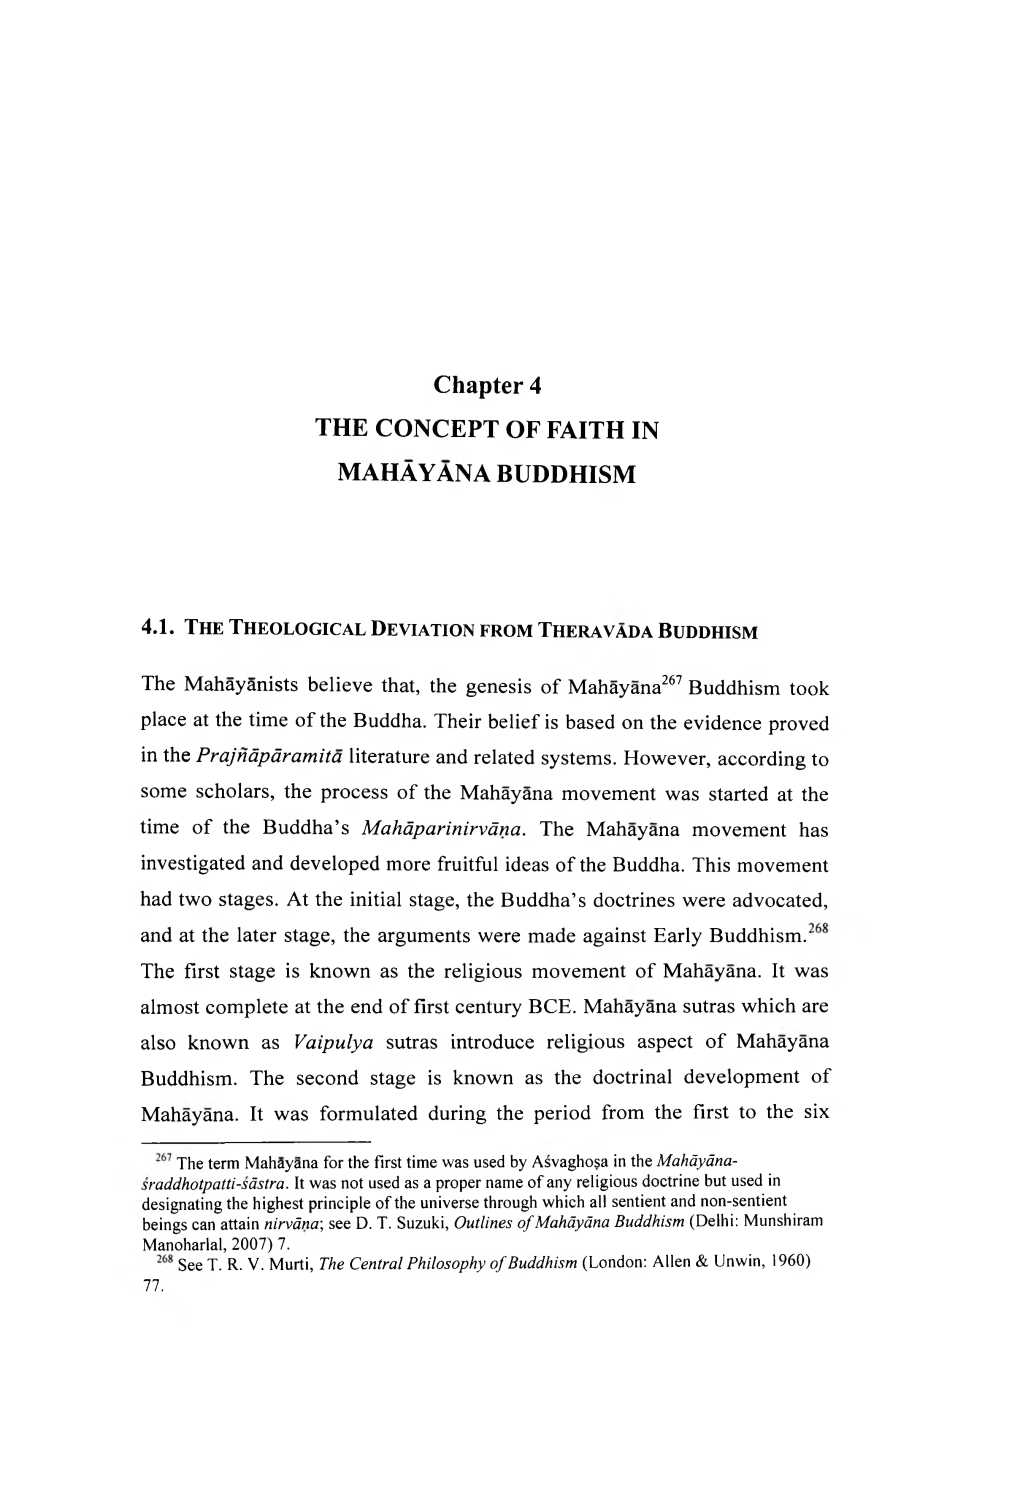 Chapter 4 the CONCEPT of FAITH in MAHAY ANA BUDDHISM